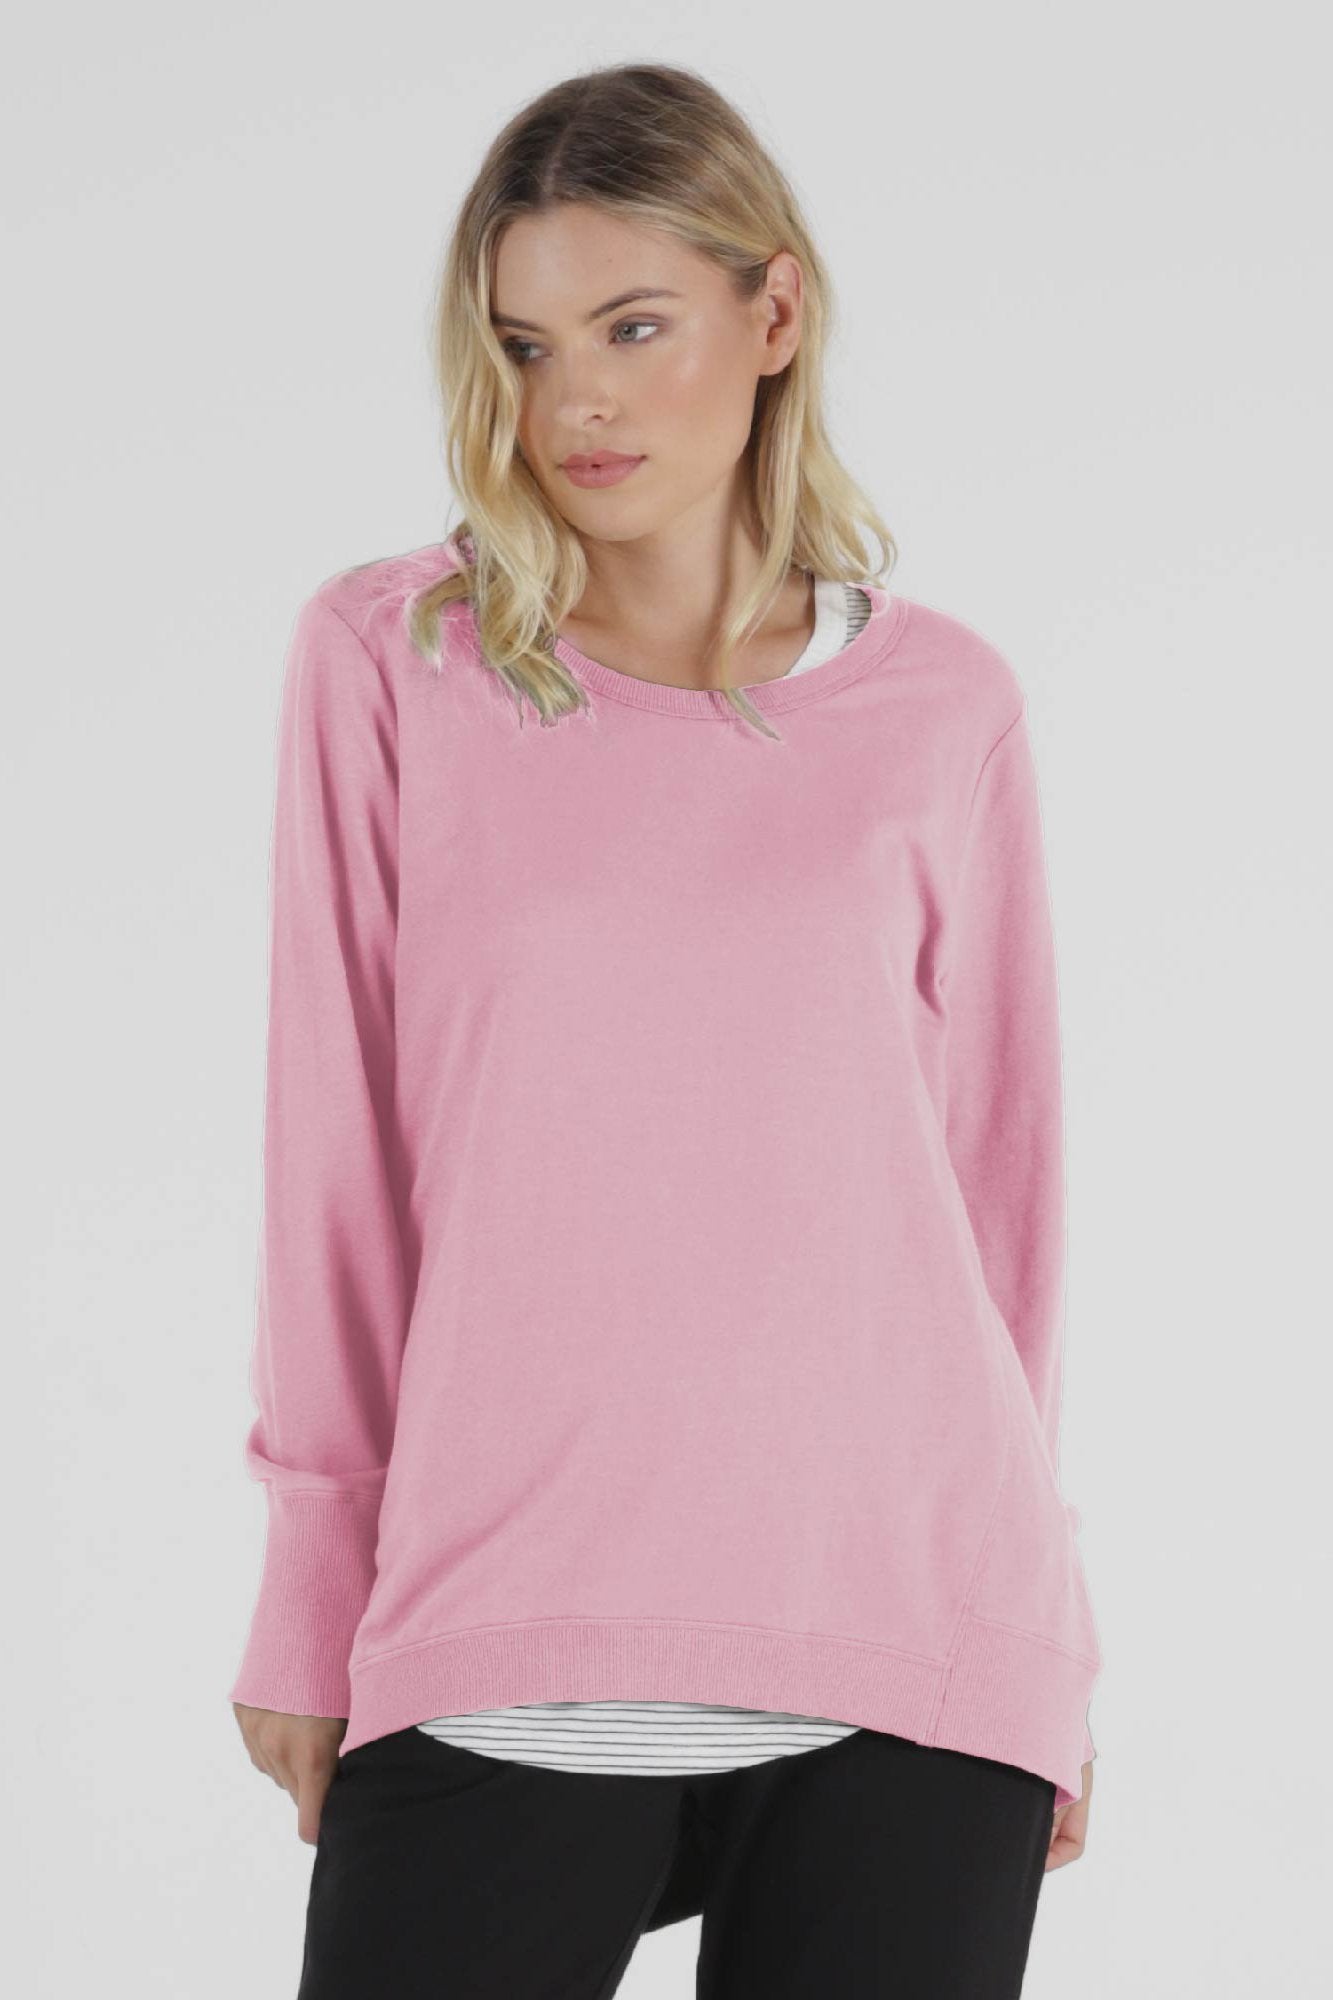 Betty Basics Dolly Sweater in Peony Pink Sizes 6 or 8 Only - Hey Sara